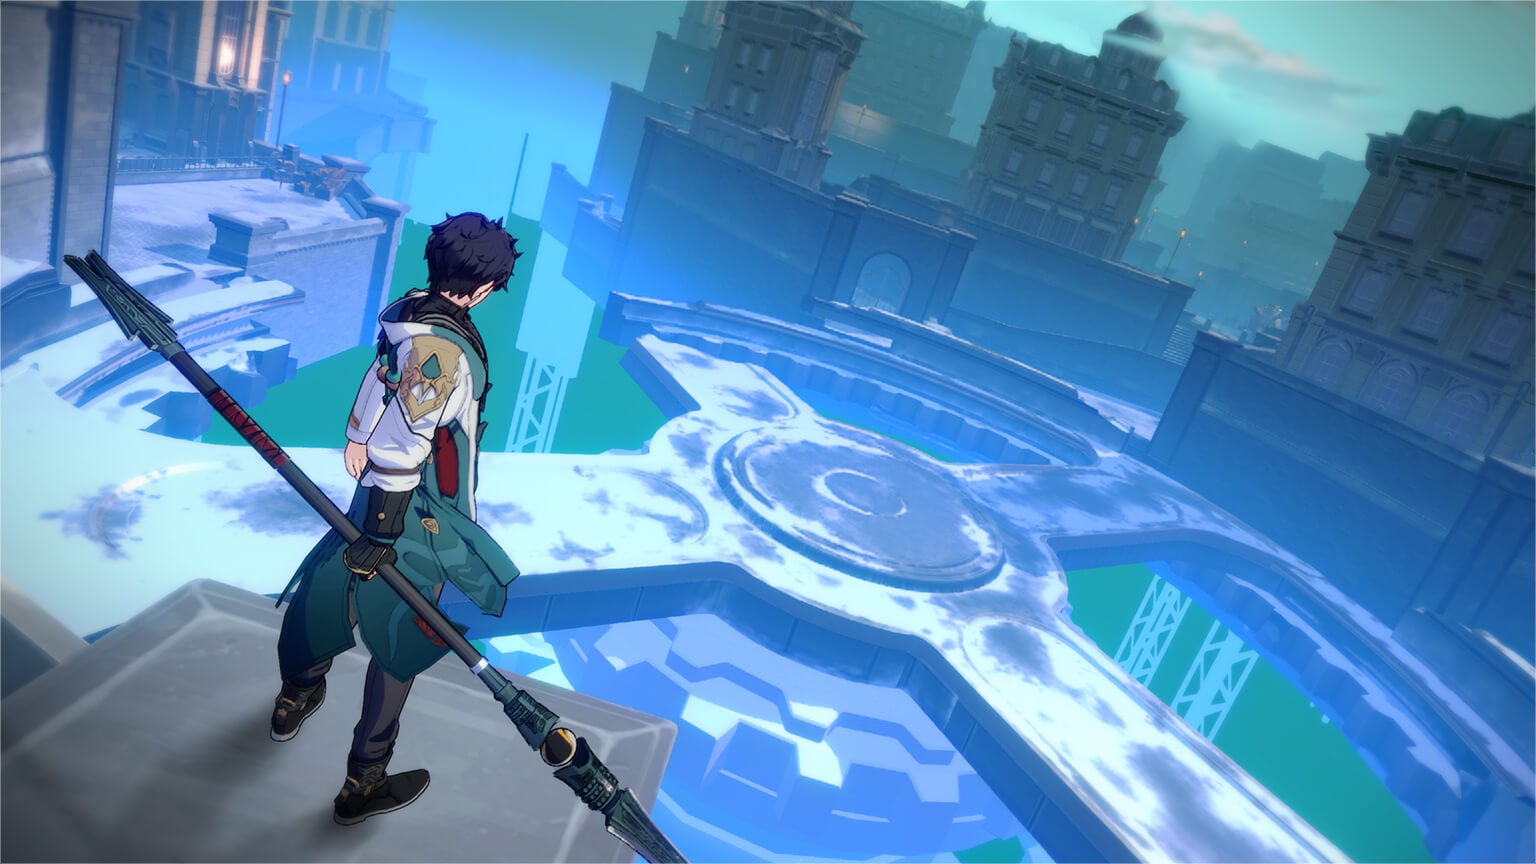 A Honkai: Star Rail character overlooks a dungeon area in the game.